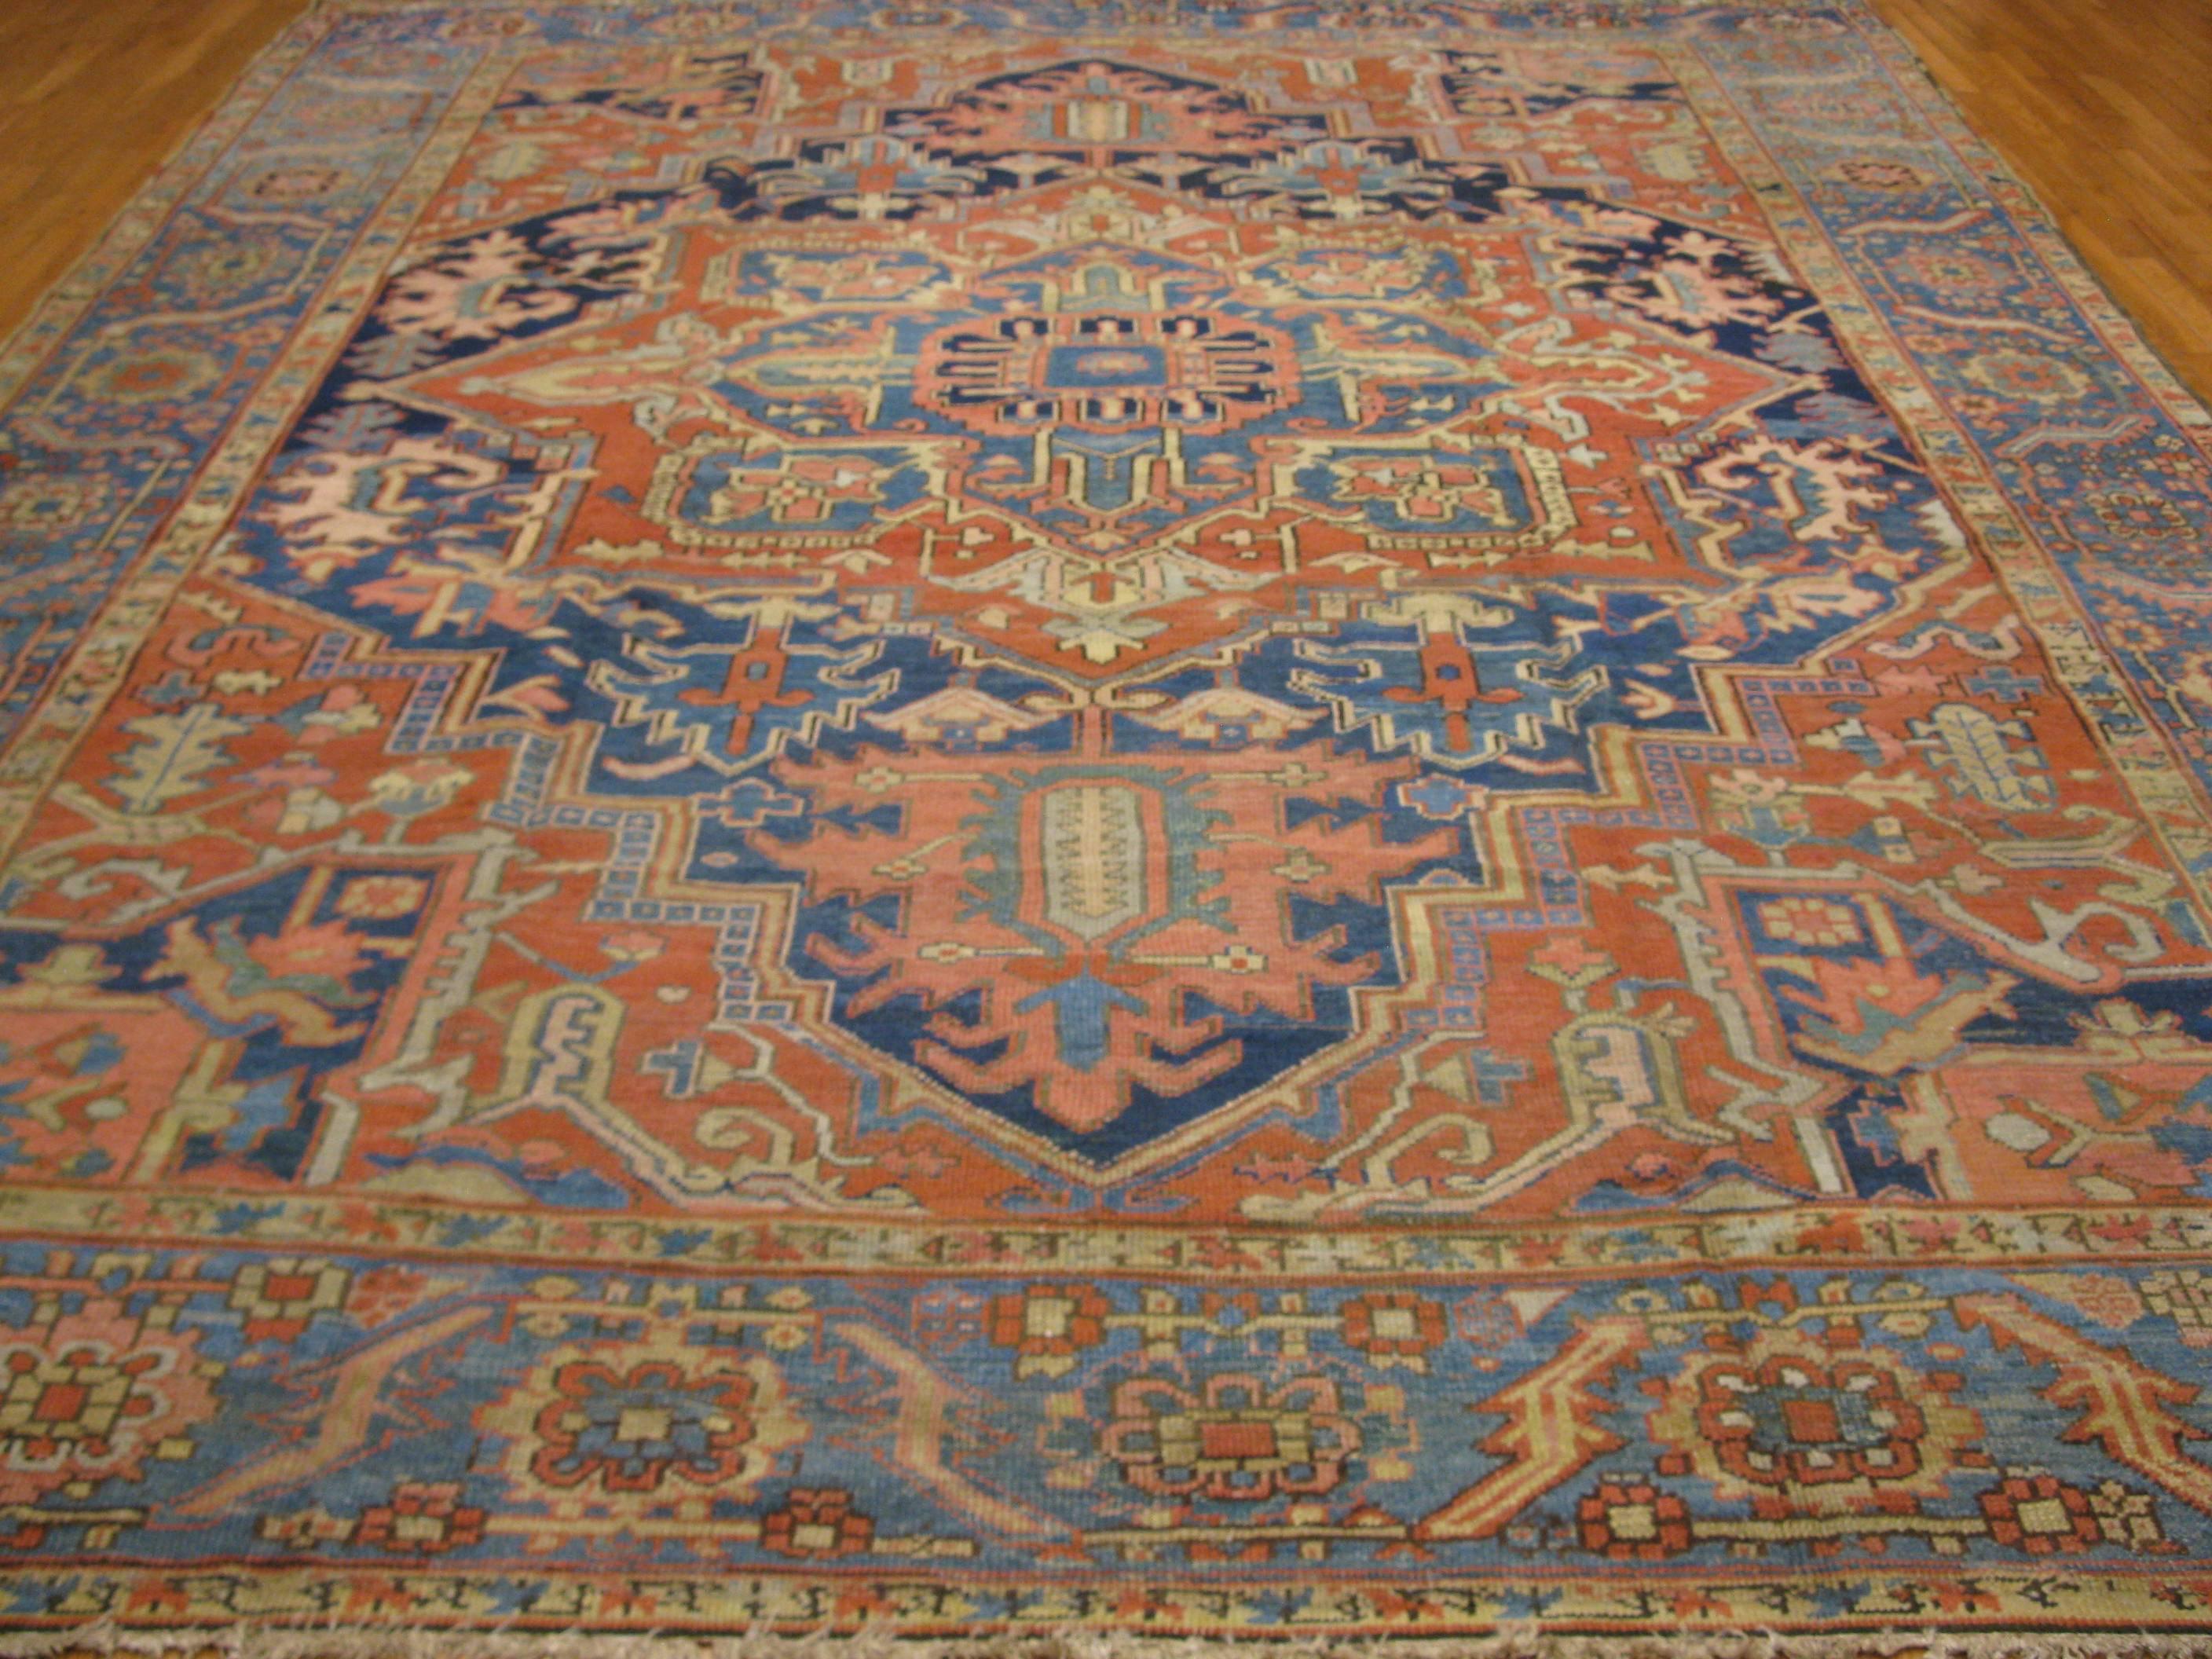 This is a beautiful hand-knotted antique Persian rug from the infamous village of Heriz one of the most sought after type of rugs made. It has a beautiful balance of red and blue colors. It measure 10.5'' x 12.10''.